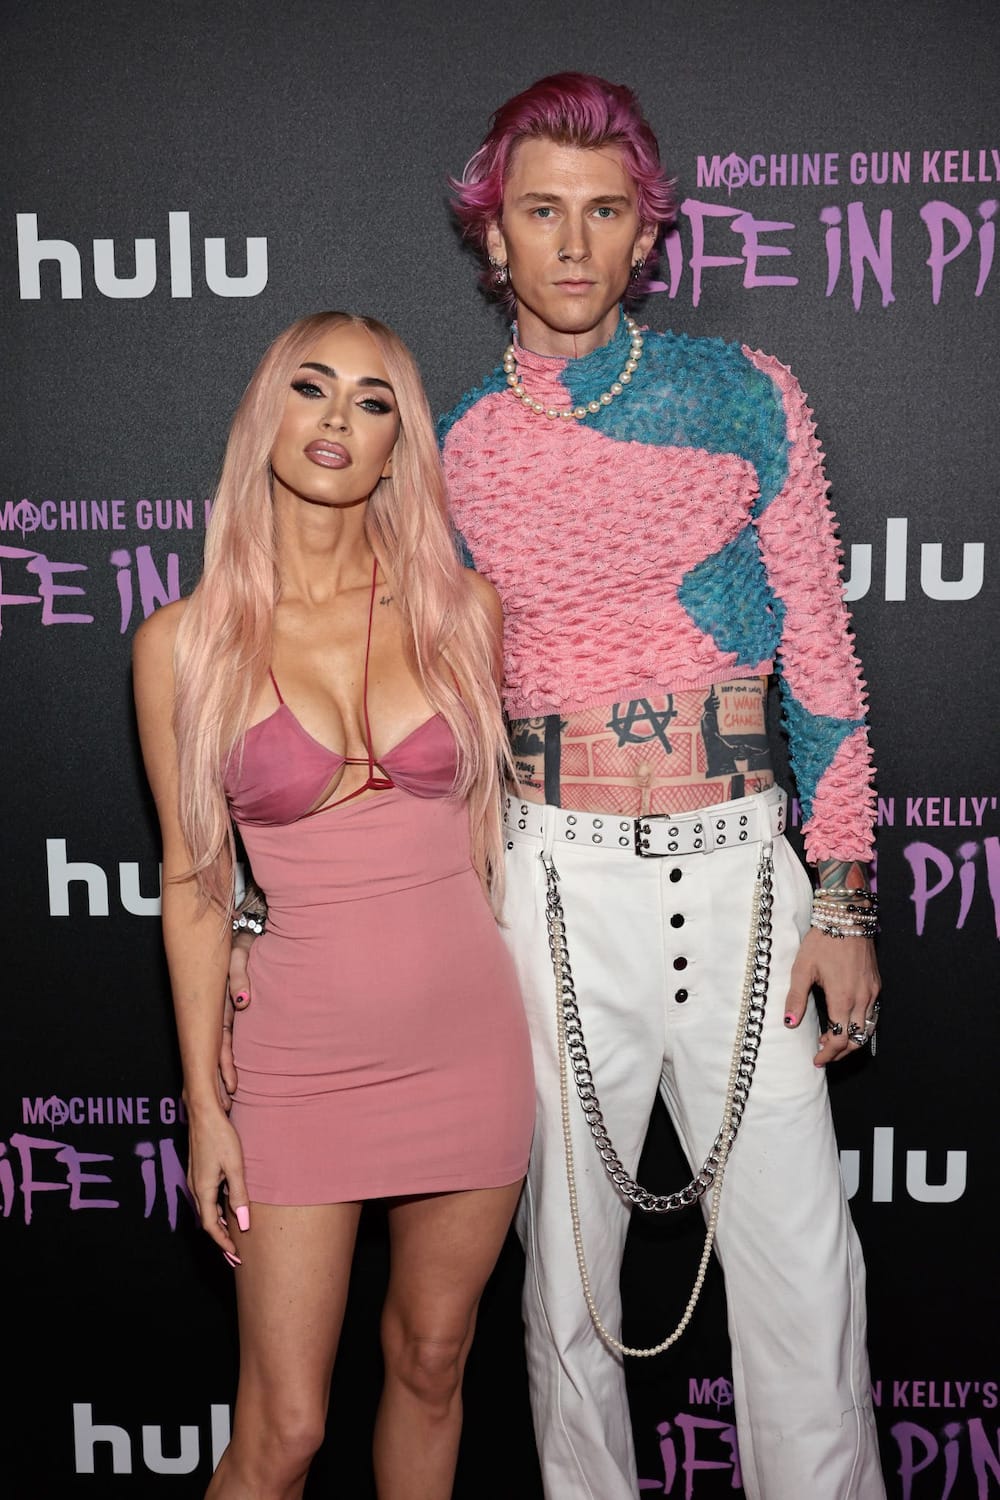 Megan Fox and Machine Gun Kelly at ‘MGK Life In Pink’ New York Premiere on June 27, 2022.